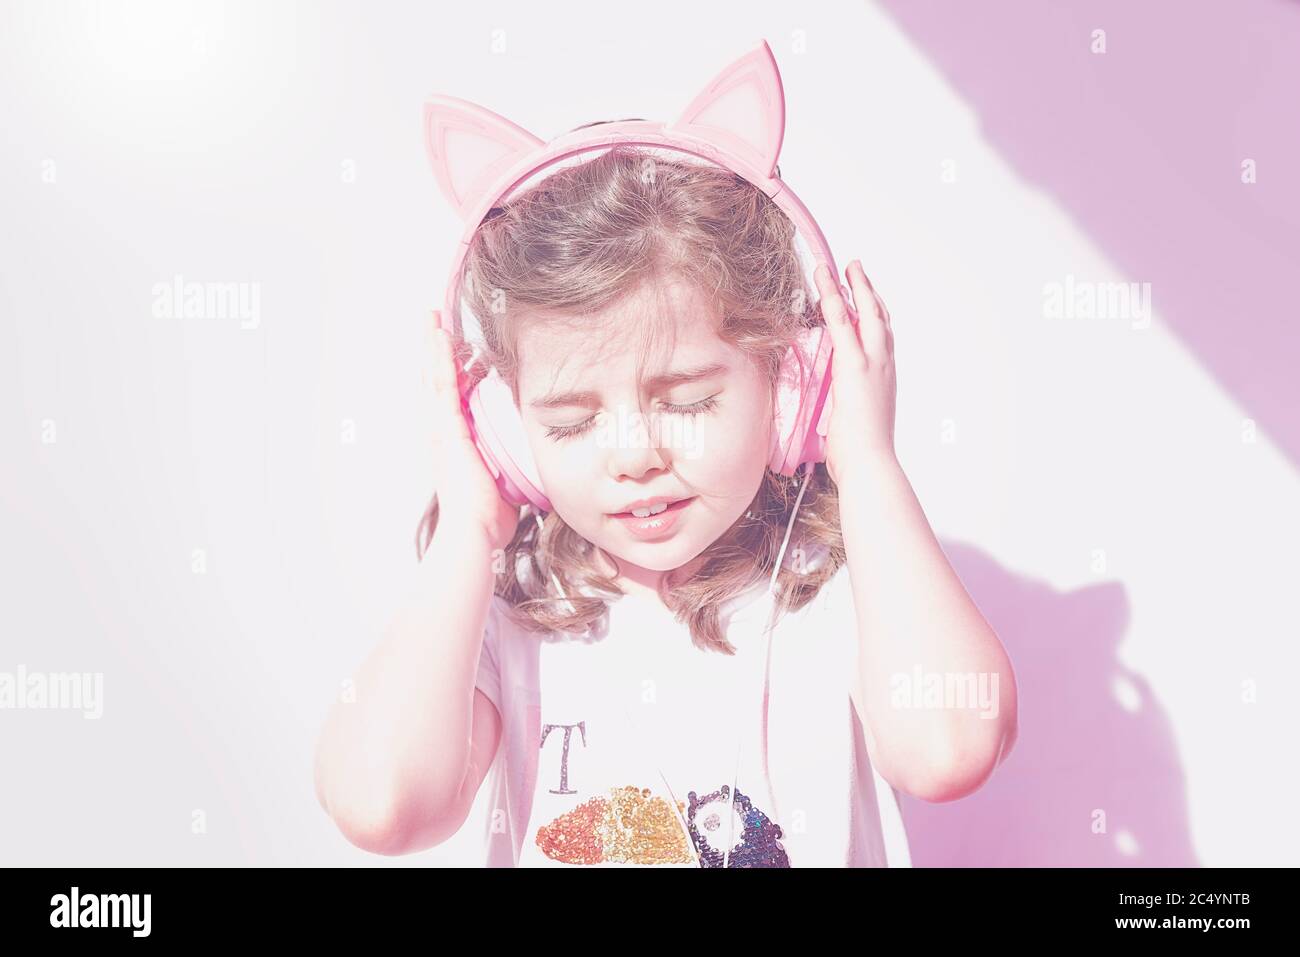 girl listening to music with her headphones Stock Photo